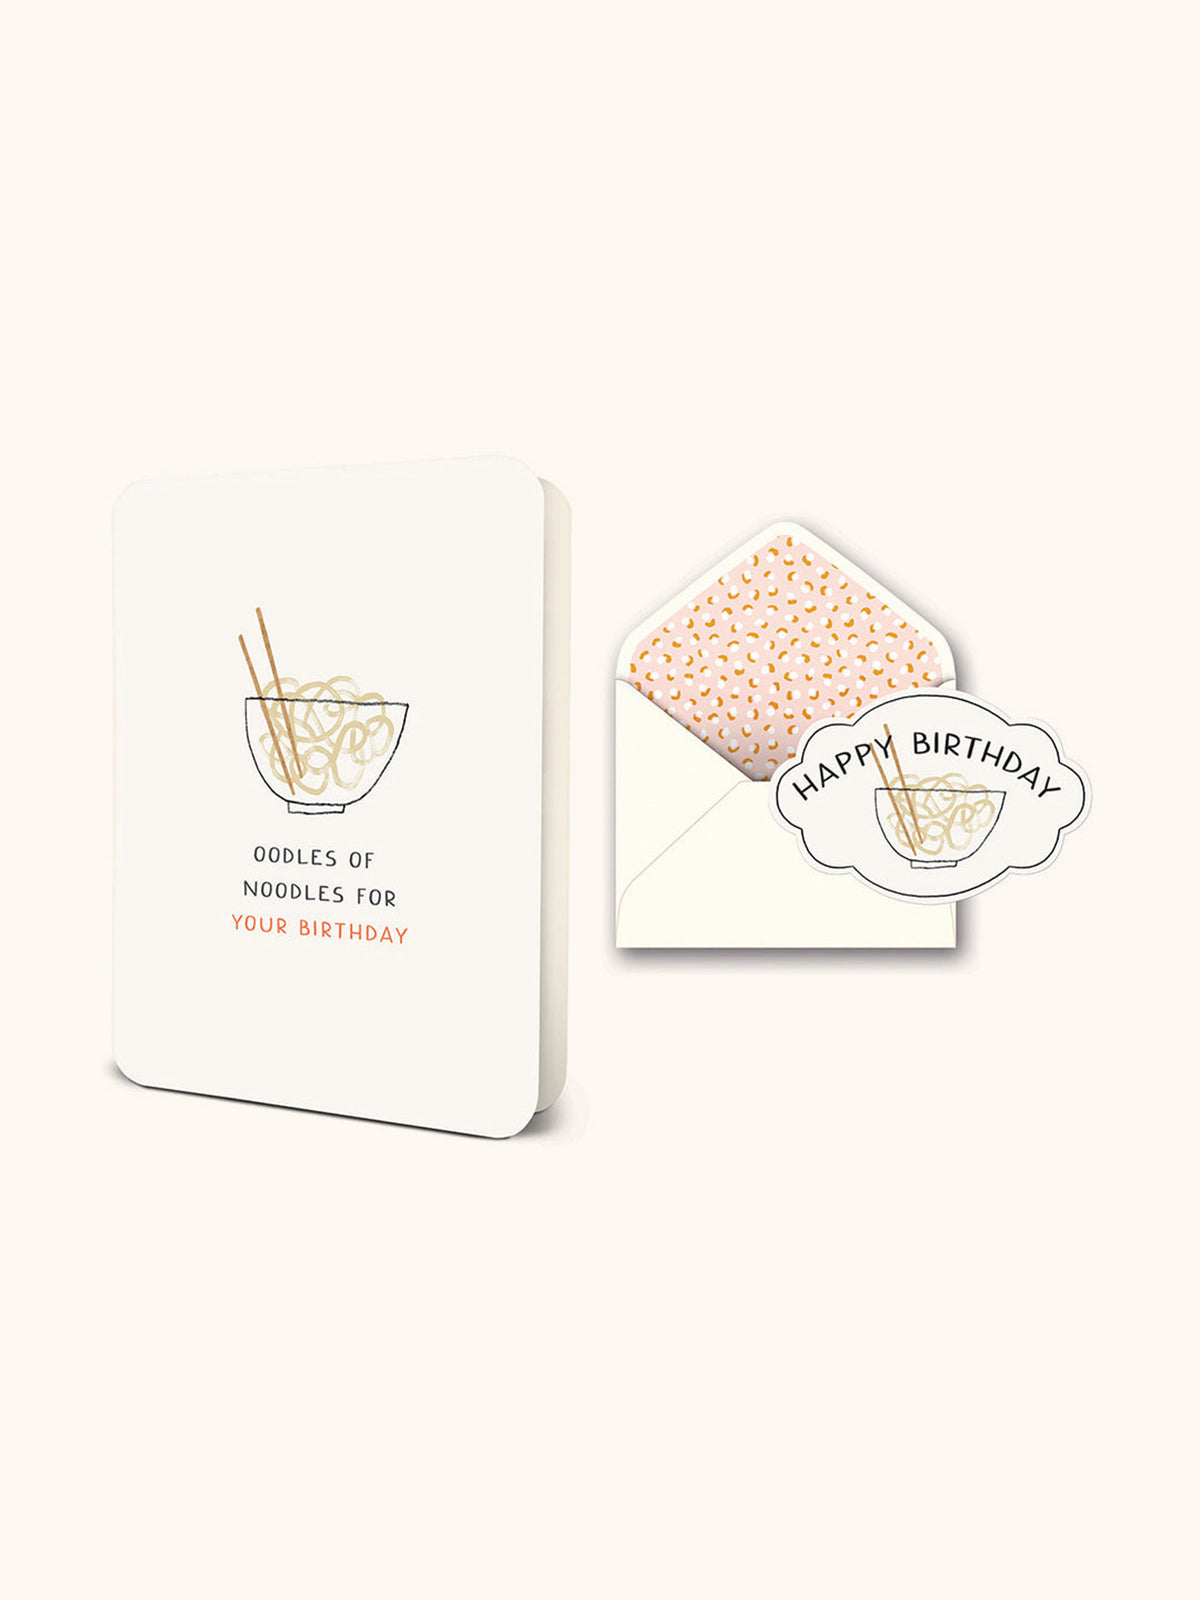 Oodles of Noodles Deluxe Greeting Card